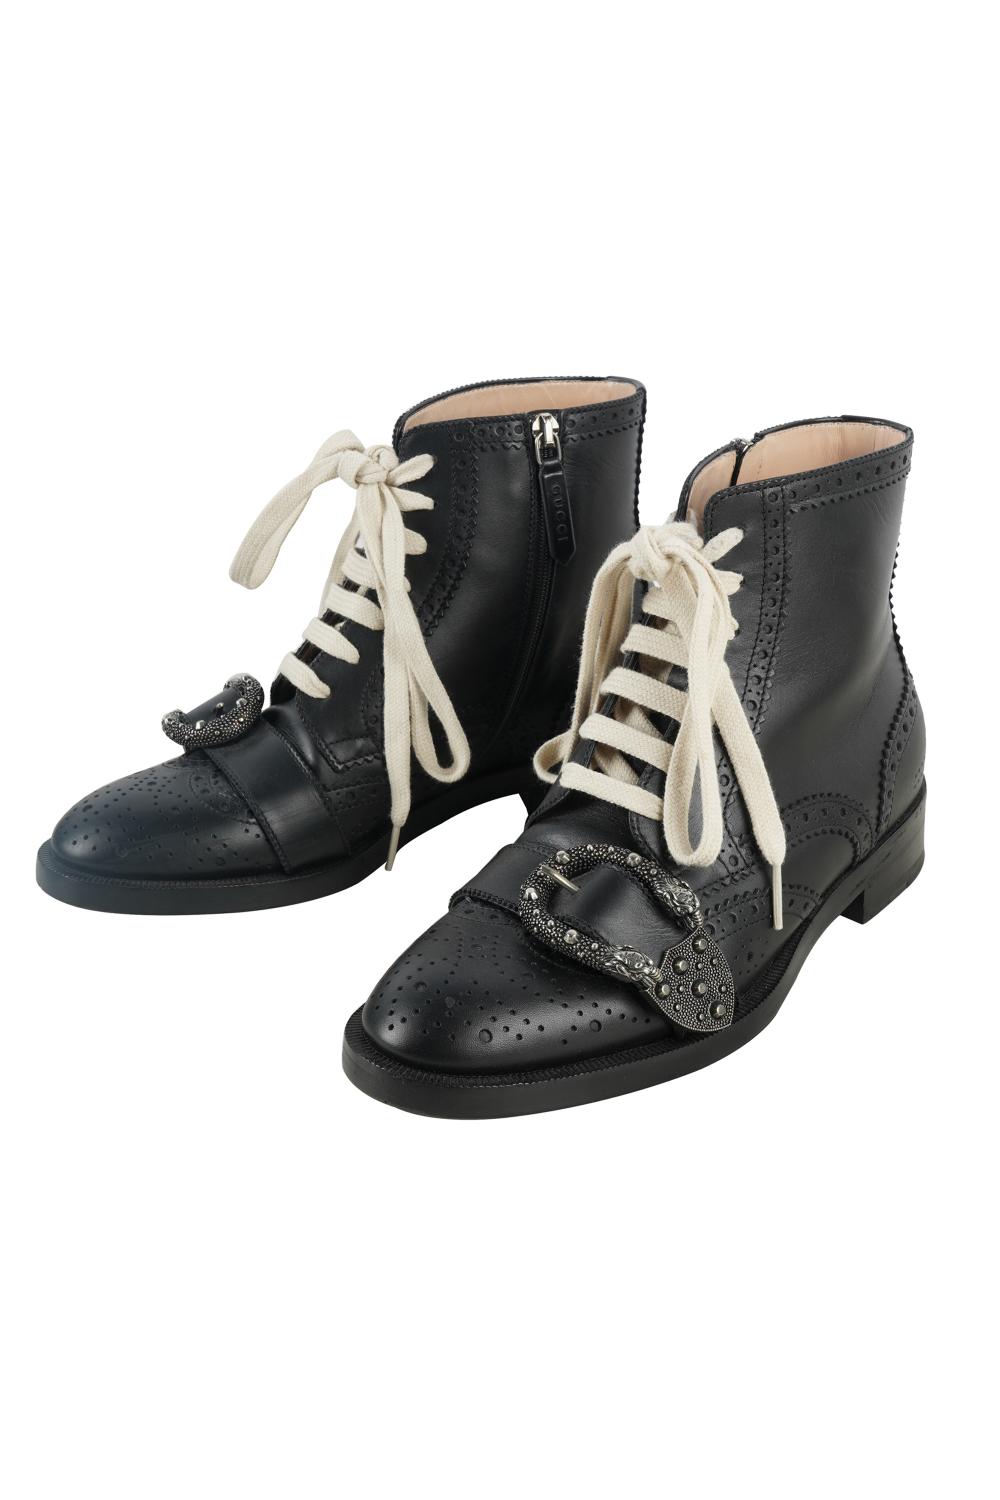 PAIR OF GUCCI LACE-UP ANKLE BOOTSblack